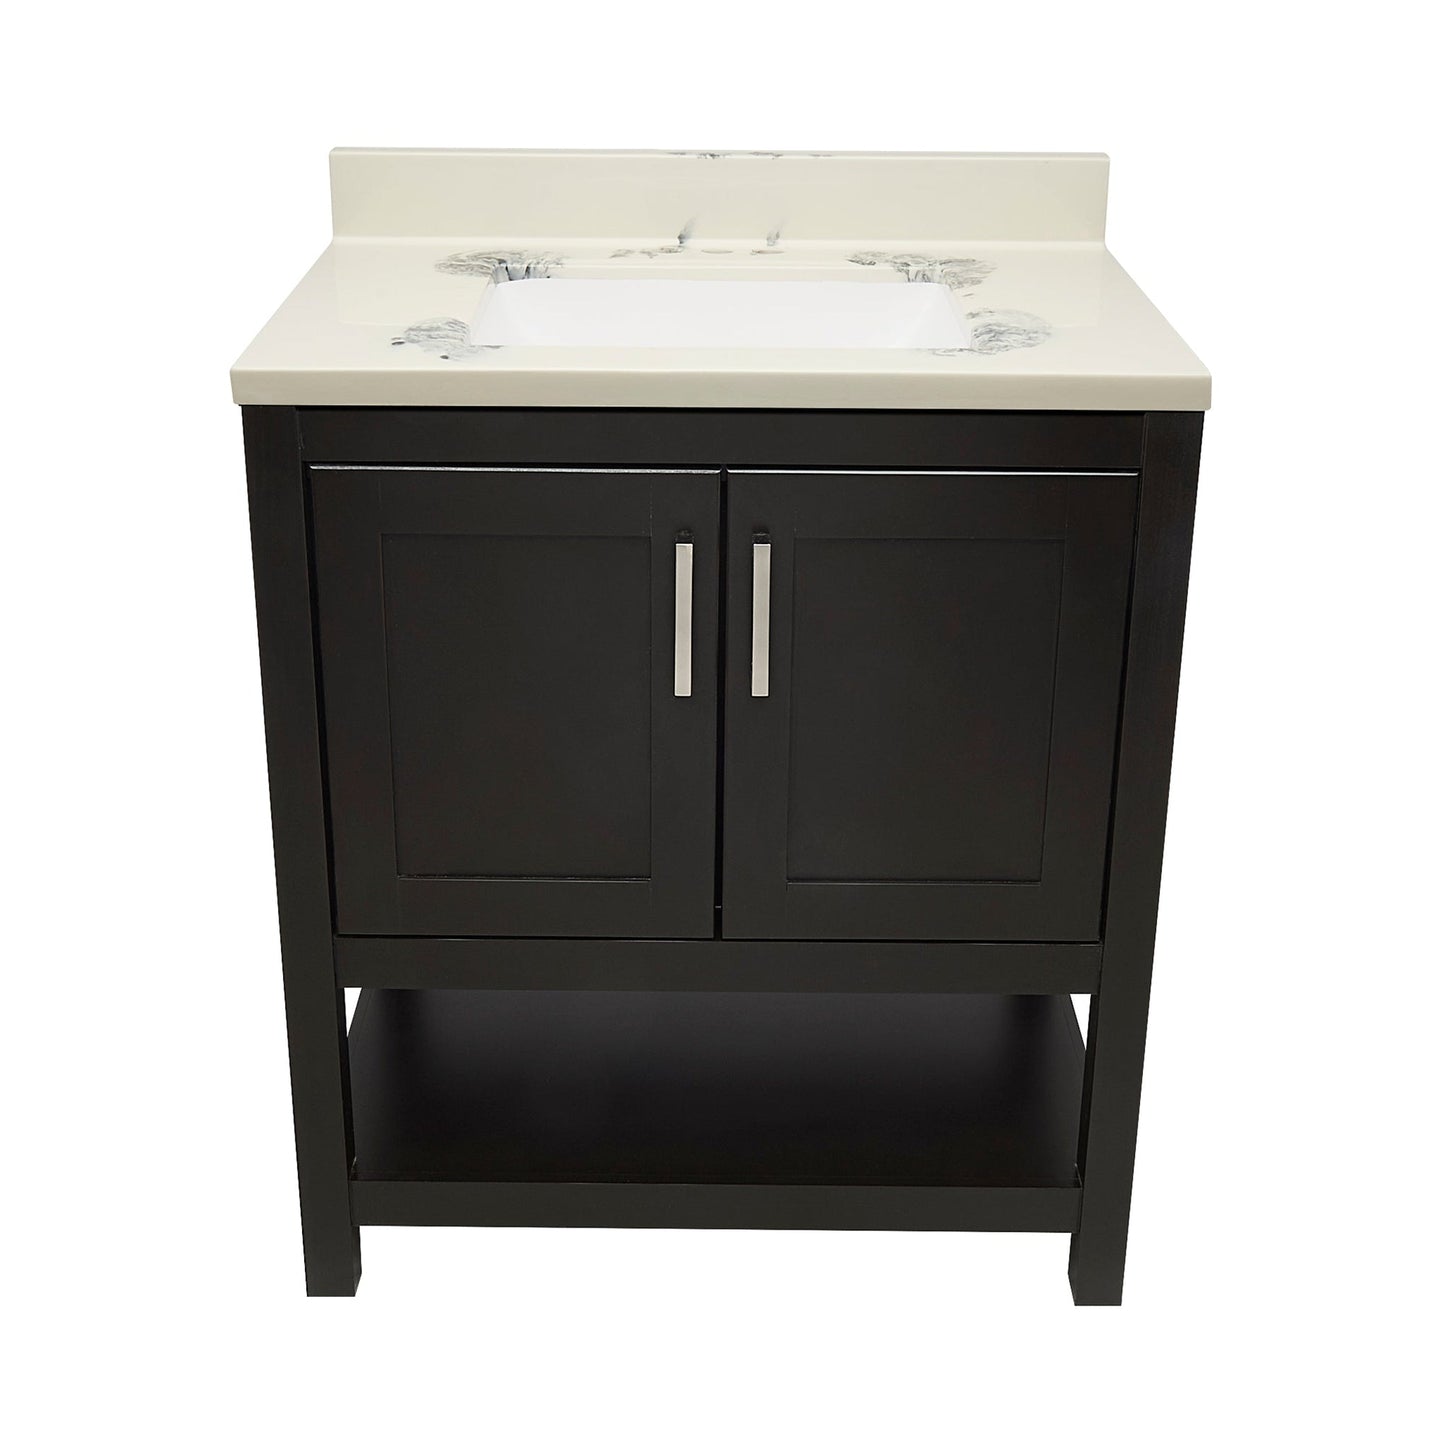 Ella's Bubbles Taos 31" Espresso Bathroom Vanity With Carrara White Cultured Marble Top With Backsplash and Sink